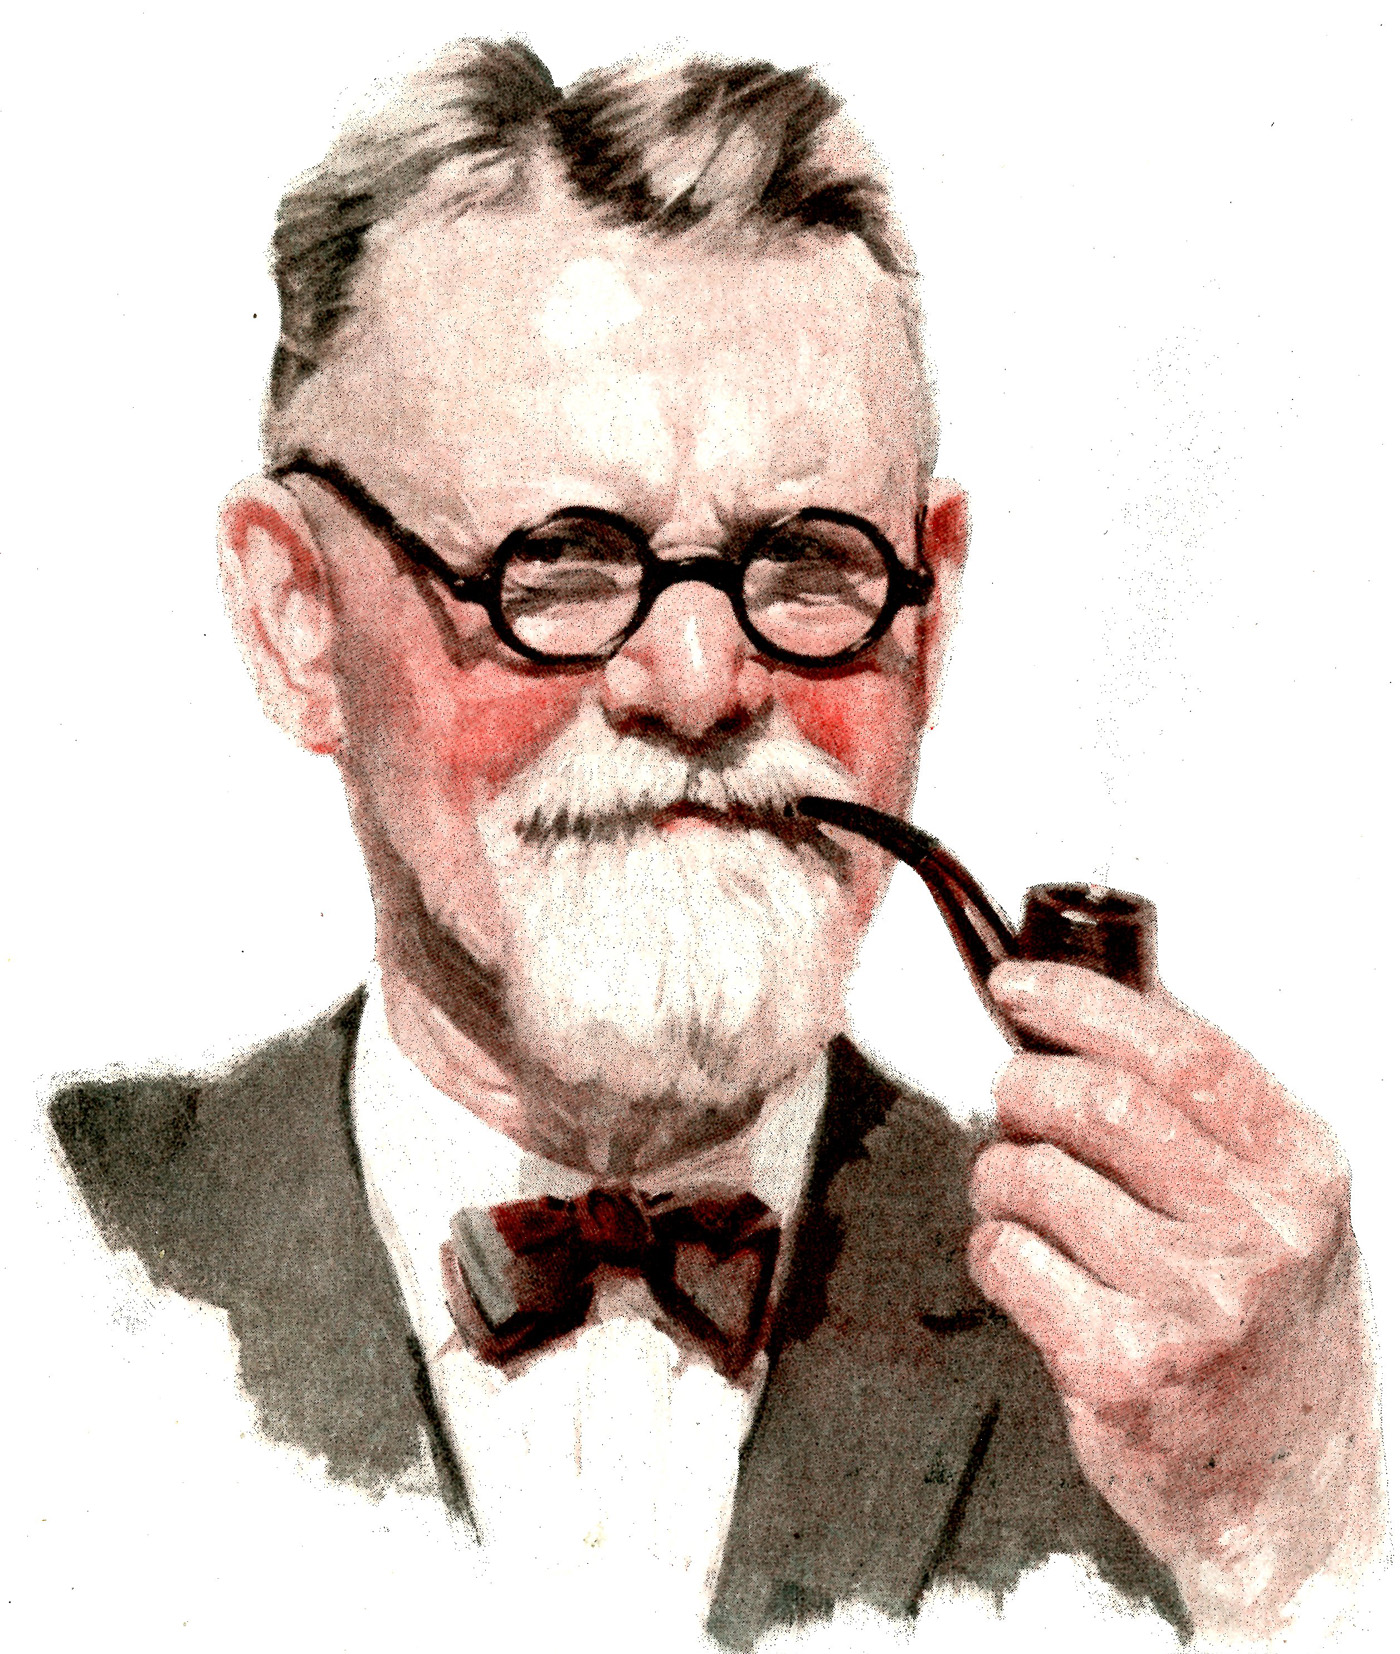 an old man with a beard, glasses and a tie holding a pipe in his hand